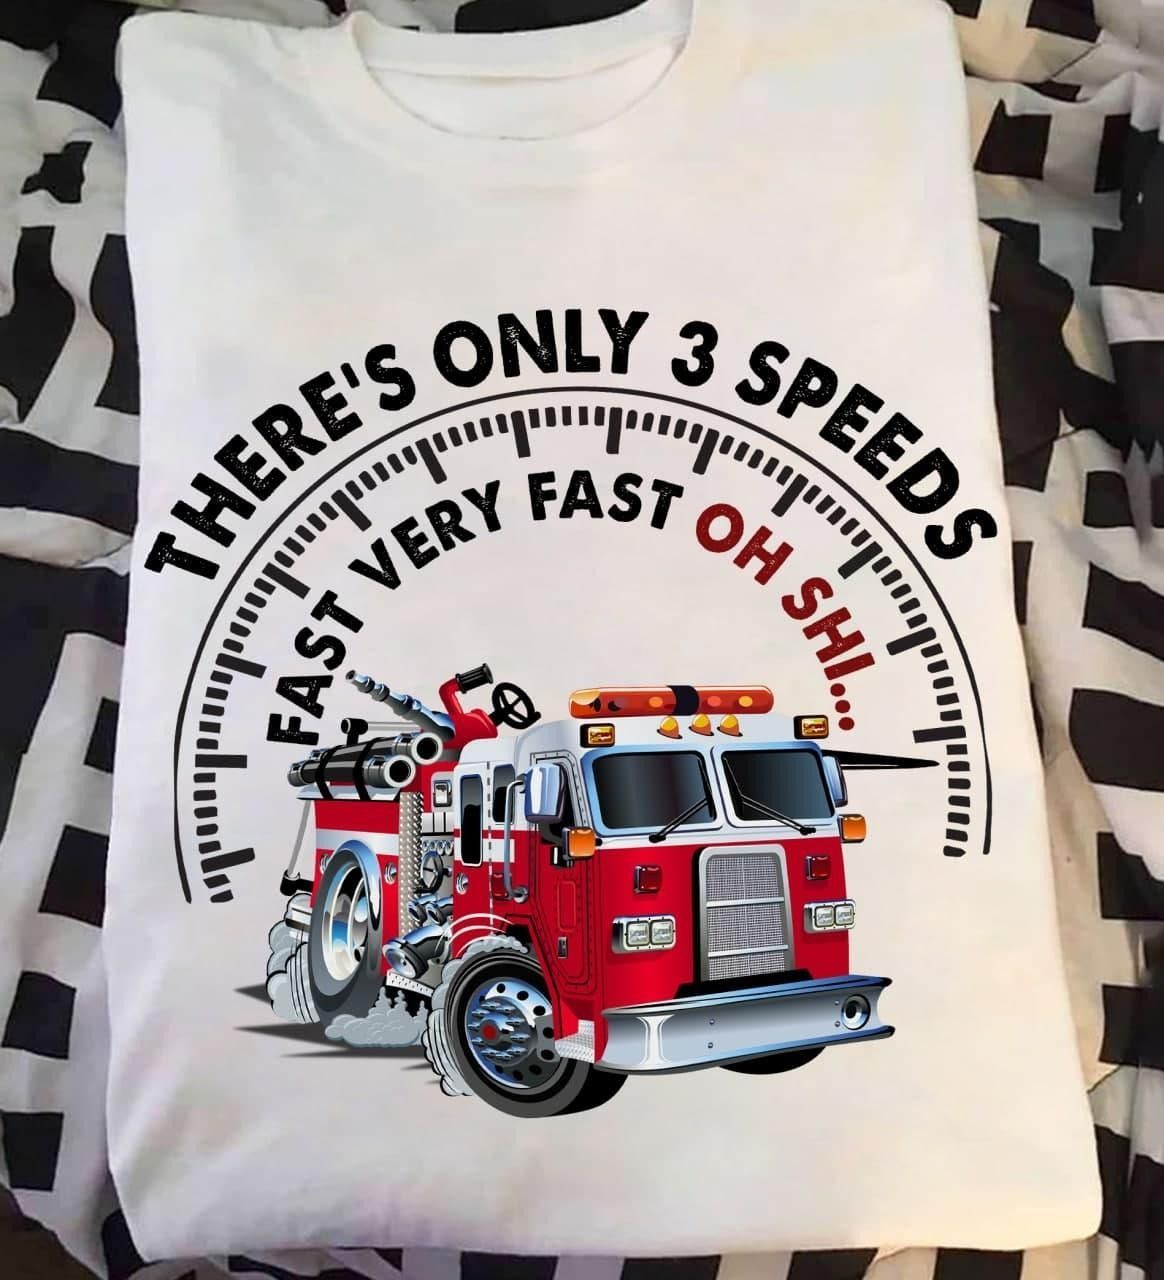 PresentsPrints, Firefighter there's only 3 speeds fast very fast oh shi Tshirt Hoodie Sweater 